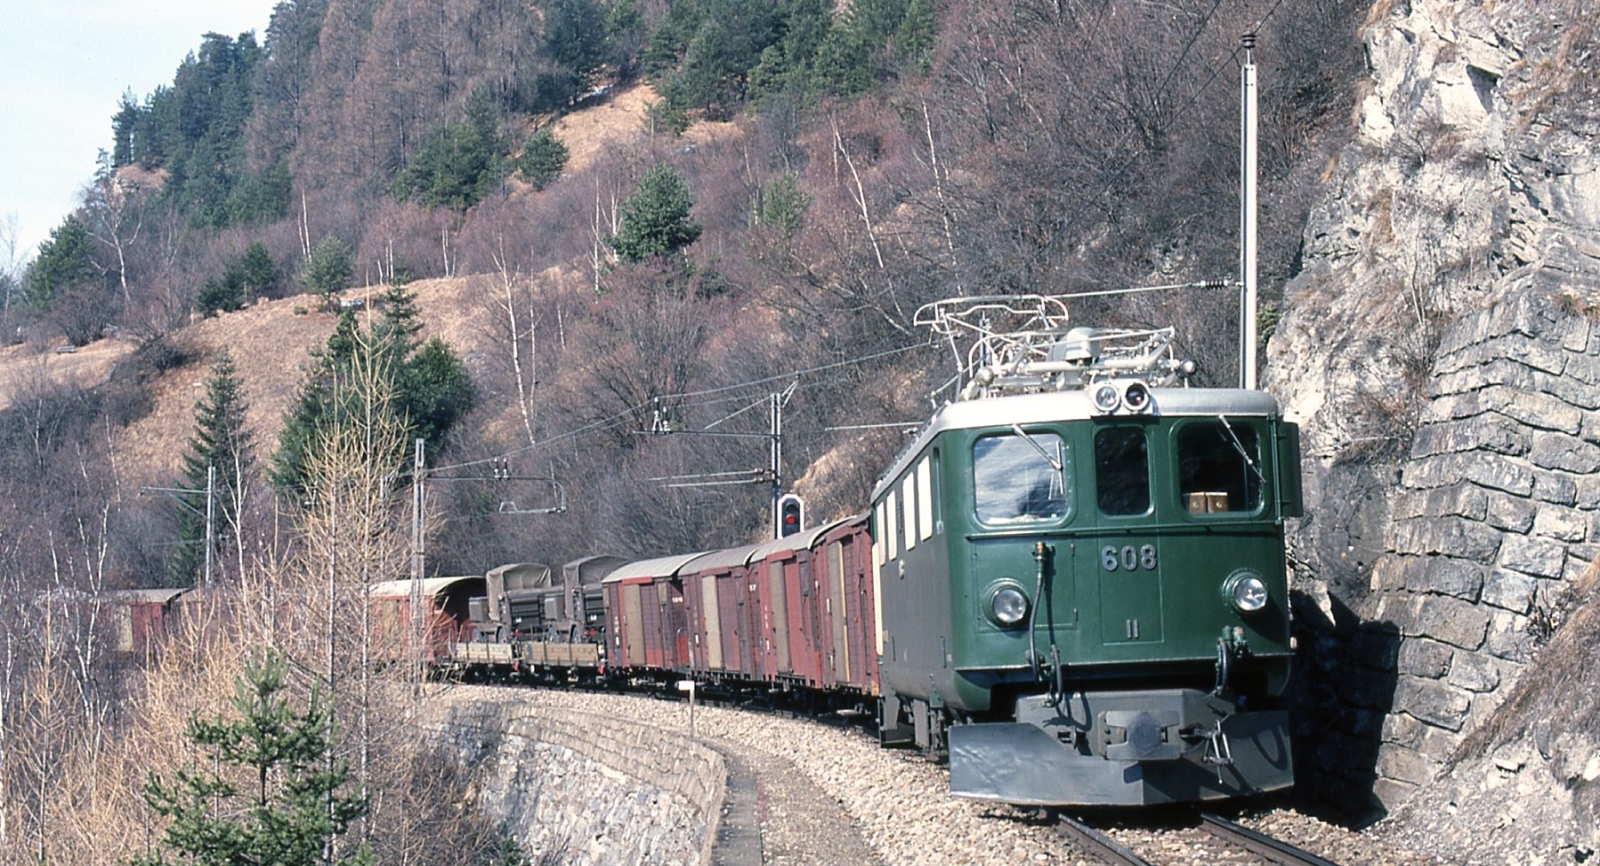 No. 608 still with historic head shape in 1985